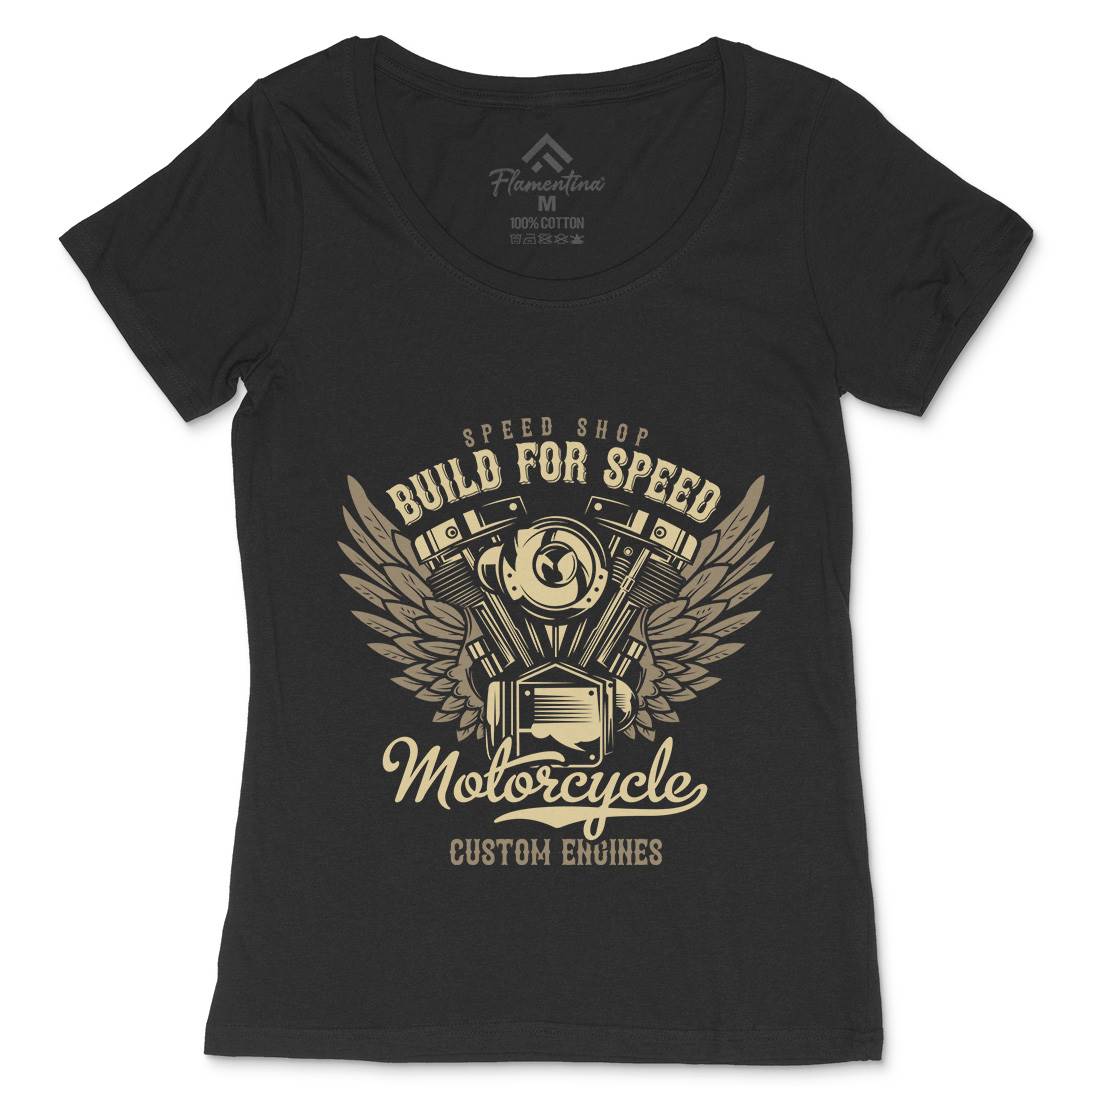 Build For Speed Womens Scoop Neck T-Shirt Motorcycles B842